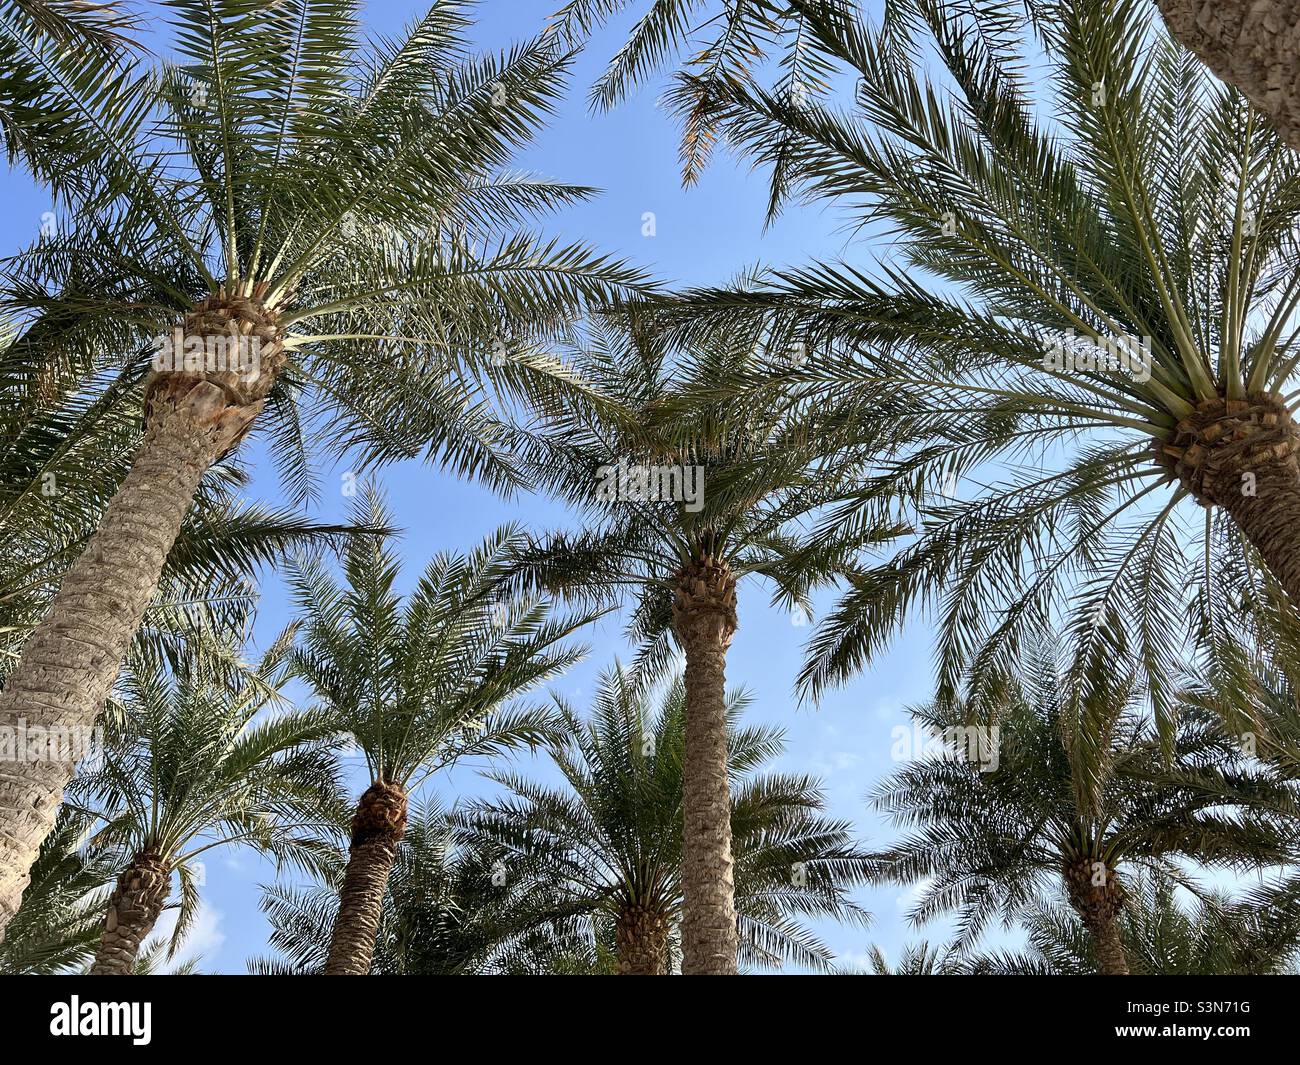 Looking up at the sky through Palm Trees Stock Photo